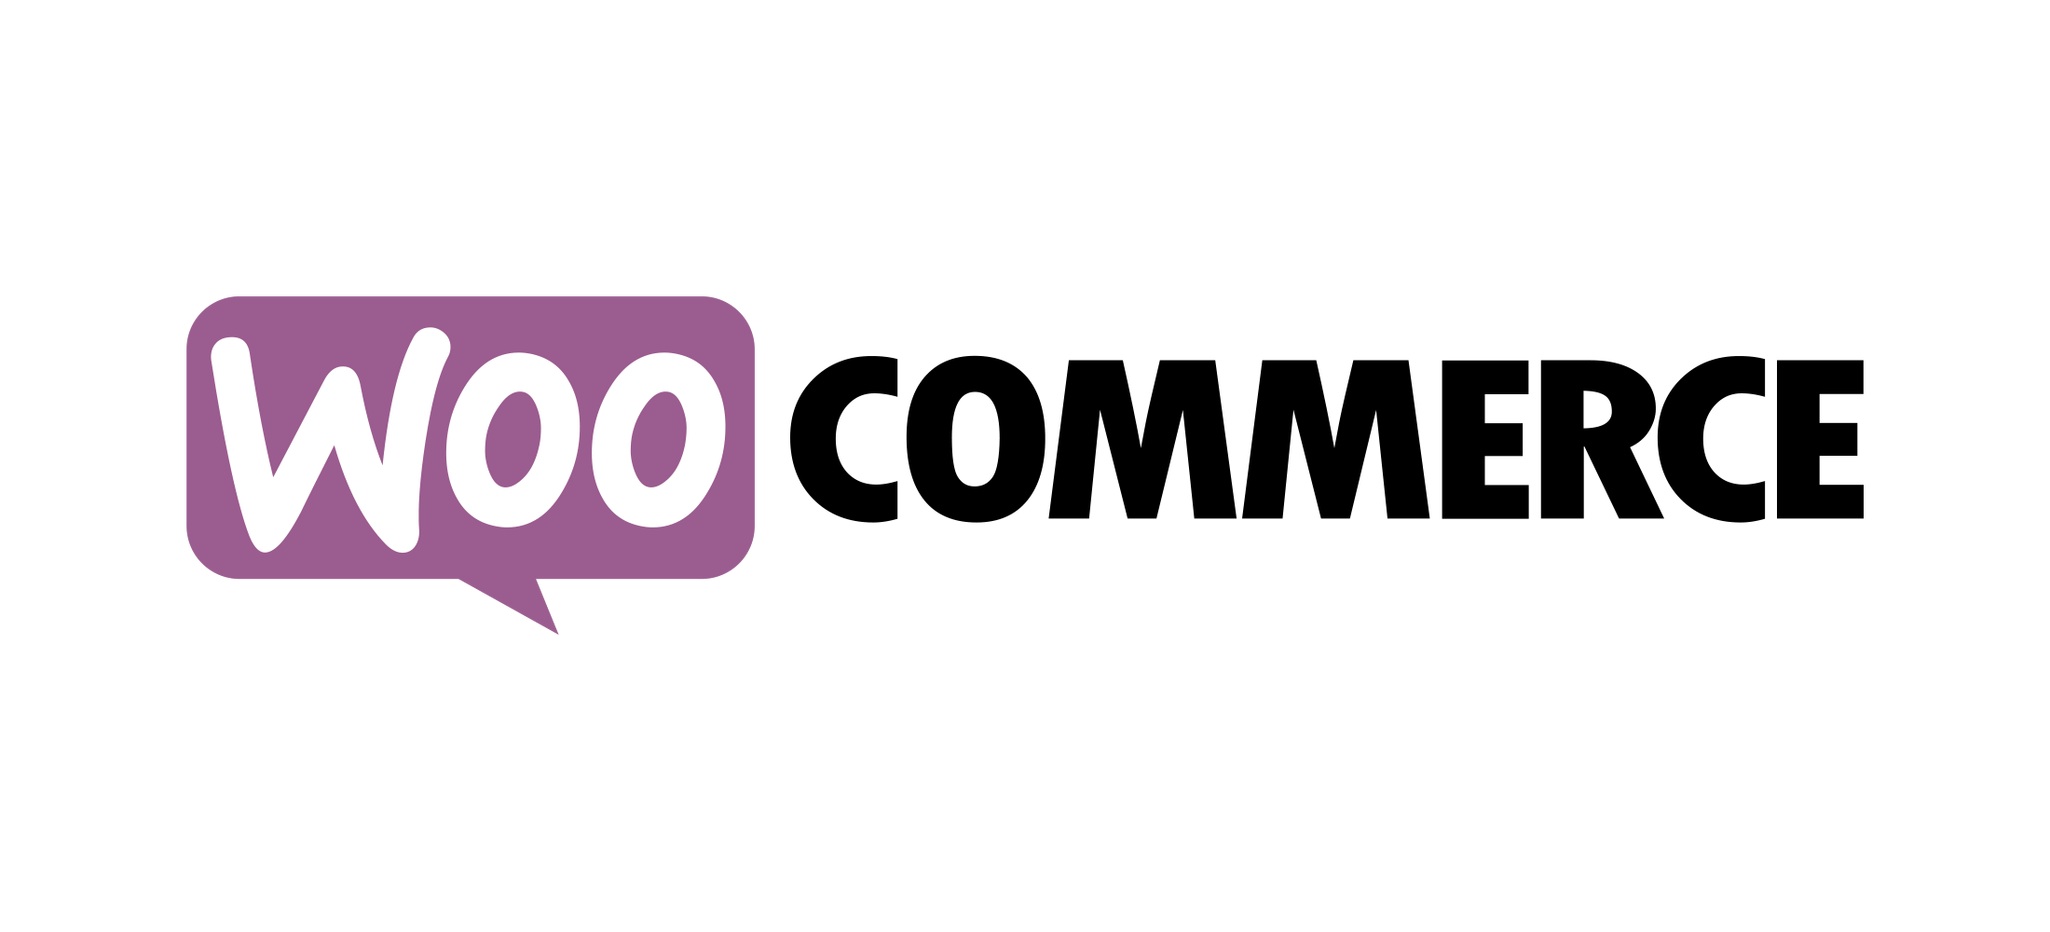 WooCommerce Releases Square Integration to Sync Online and Offline Purchases and Inventory